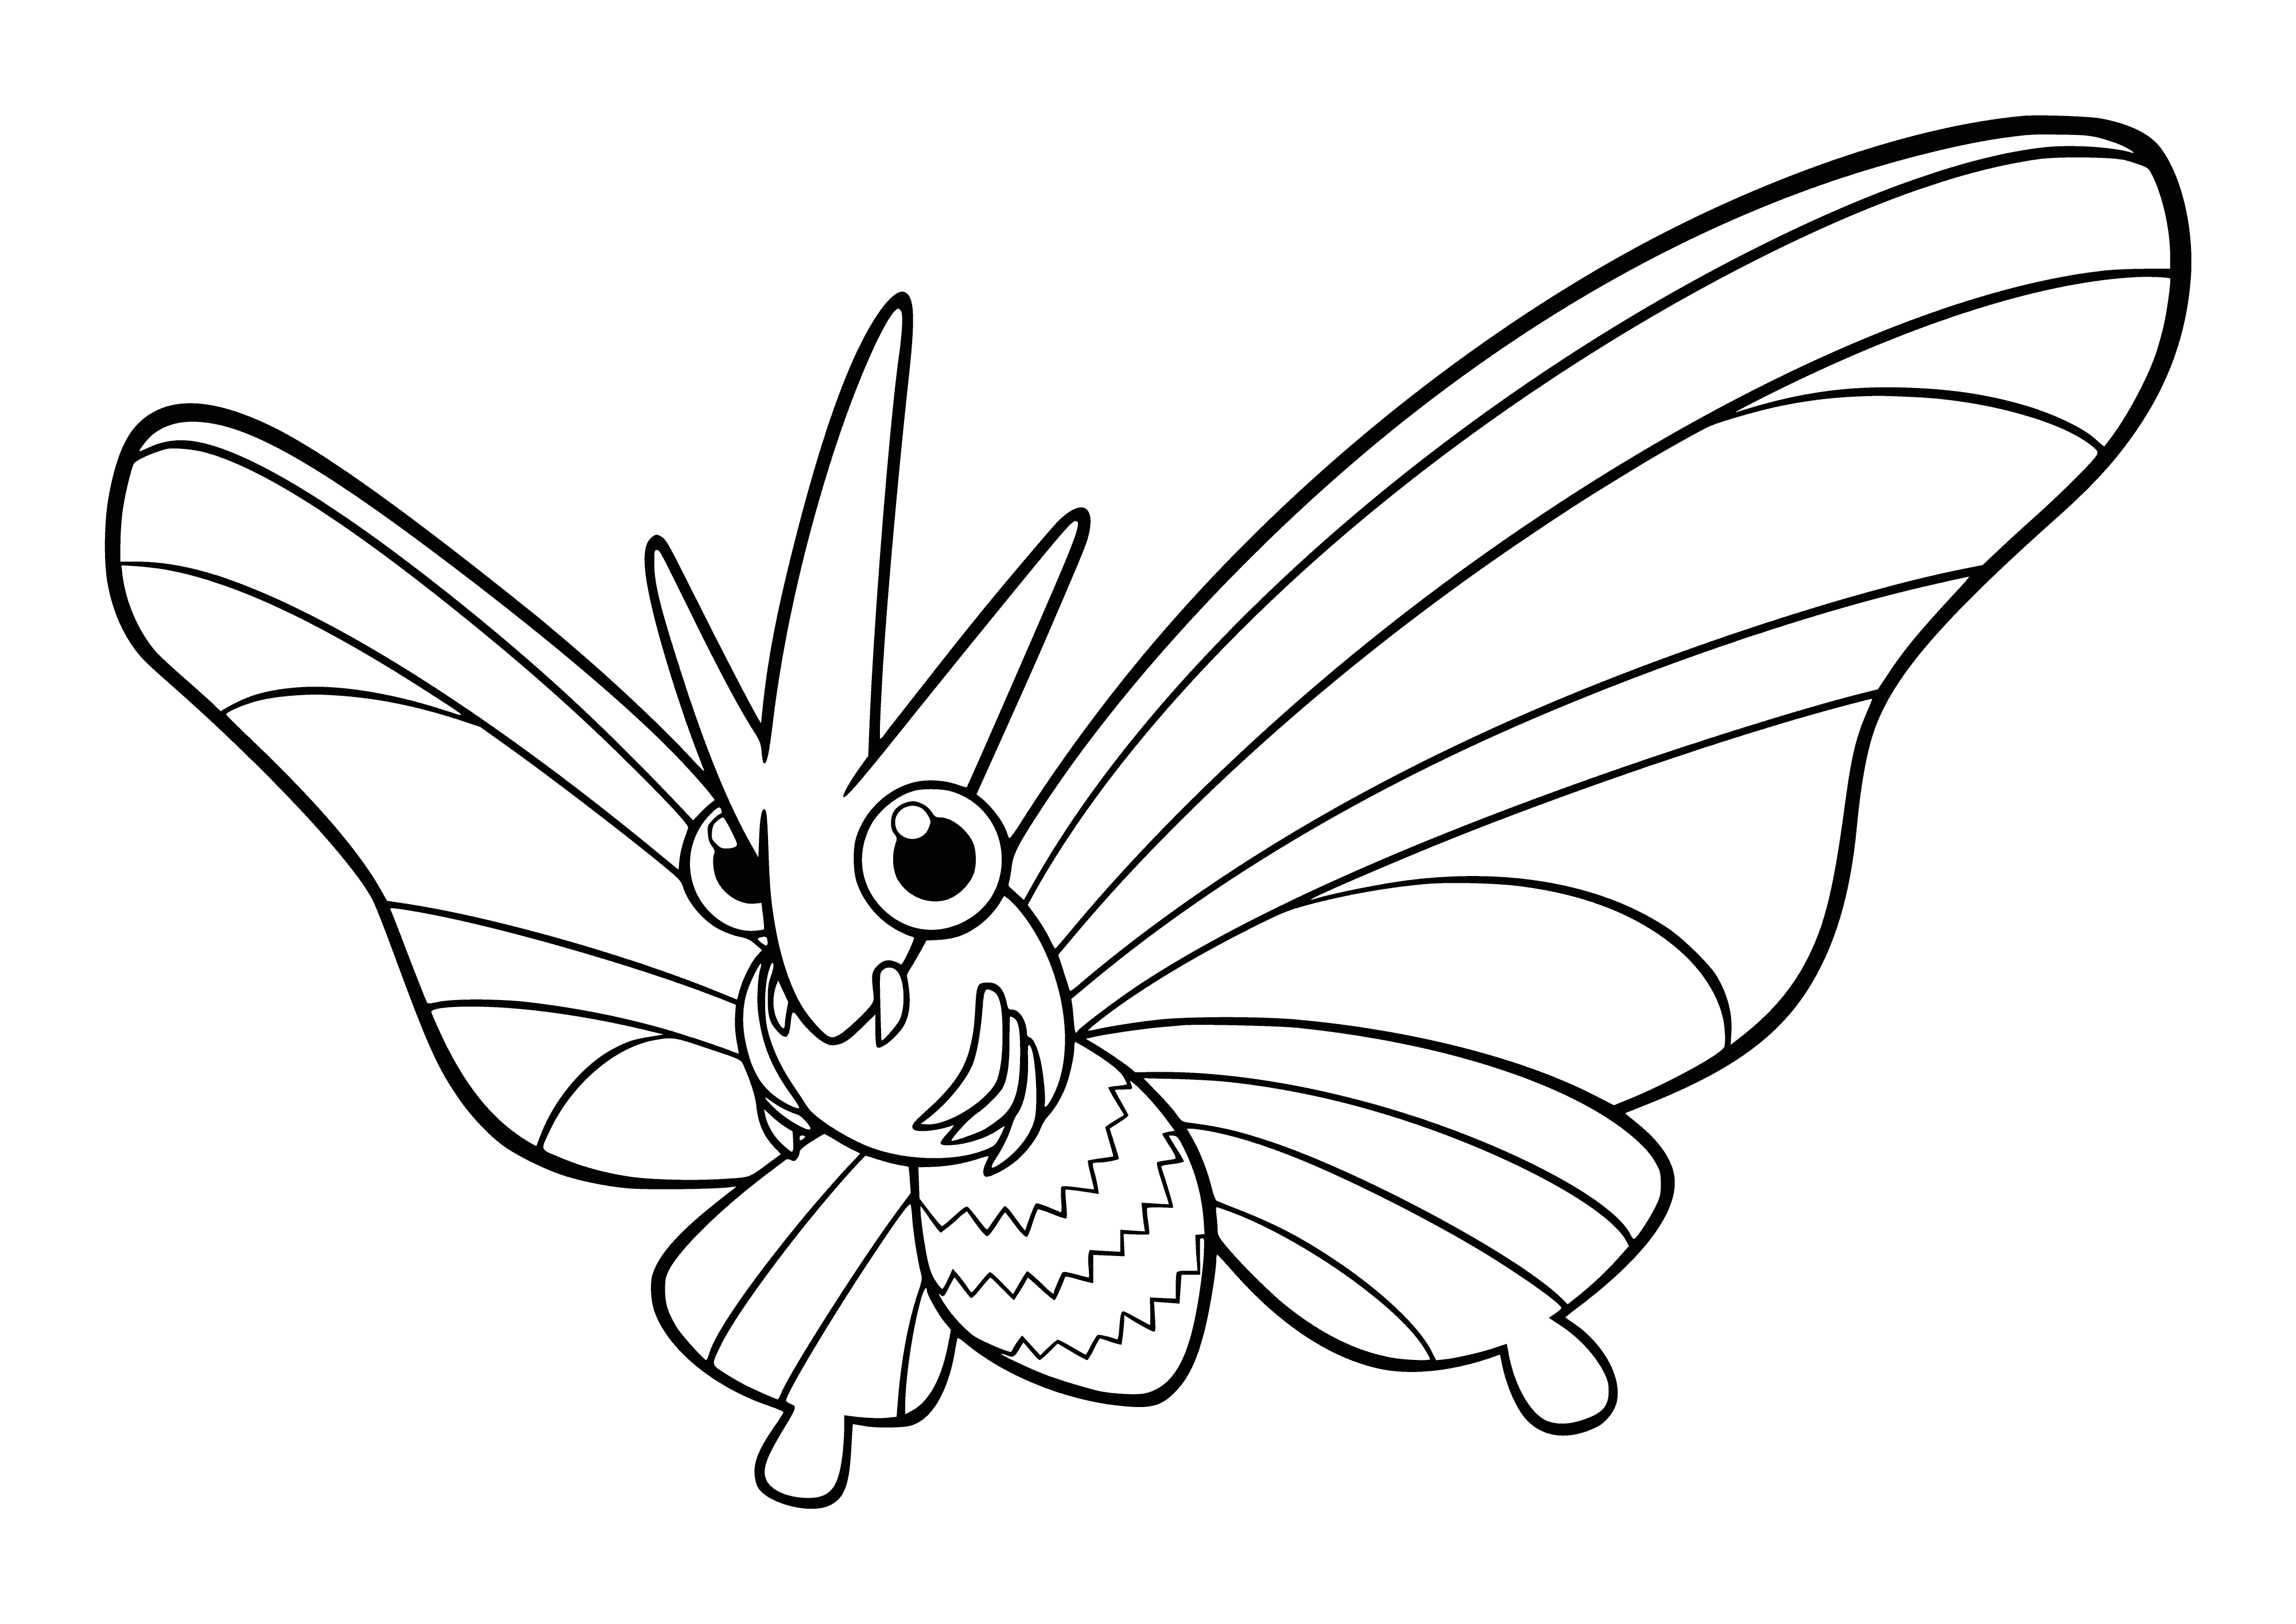 coloring page: Venomoth is a large moth w/ paralytic dust-covered wings, red eyes, purple body & black wings w/ red & yellow markings. It has a long proboscis to suck up prey juices.